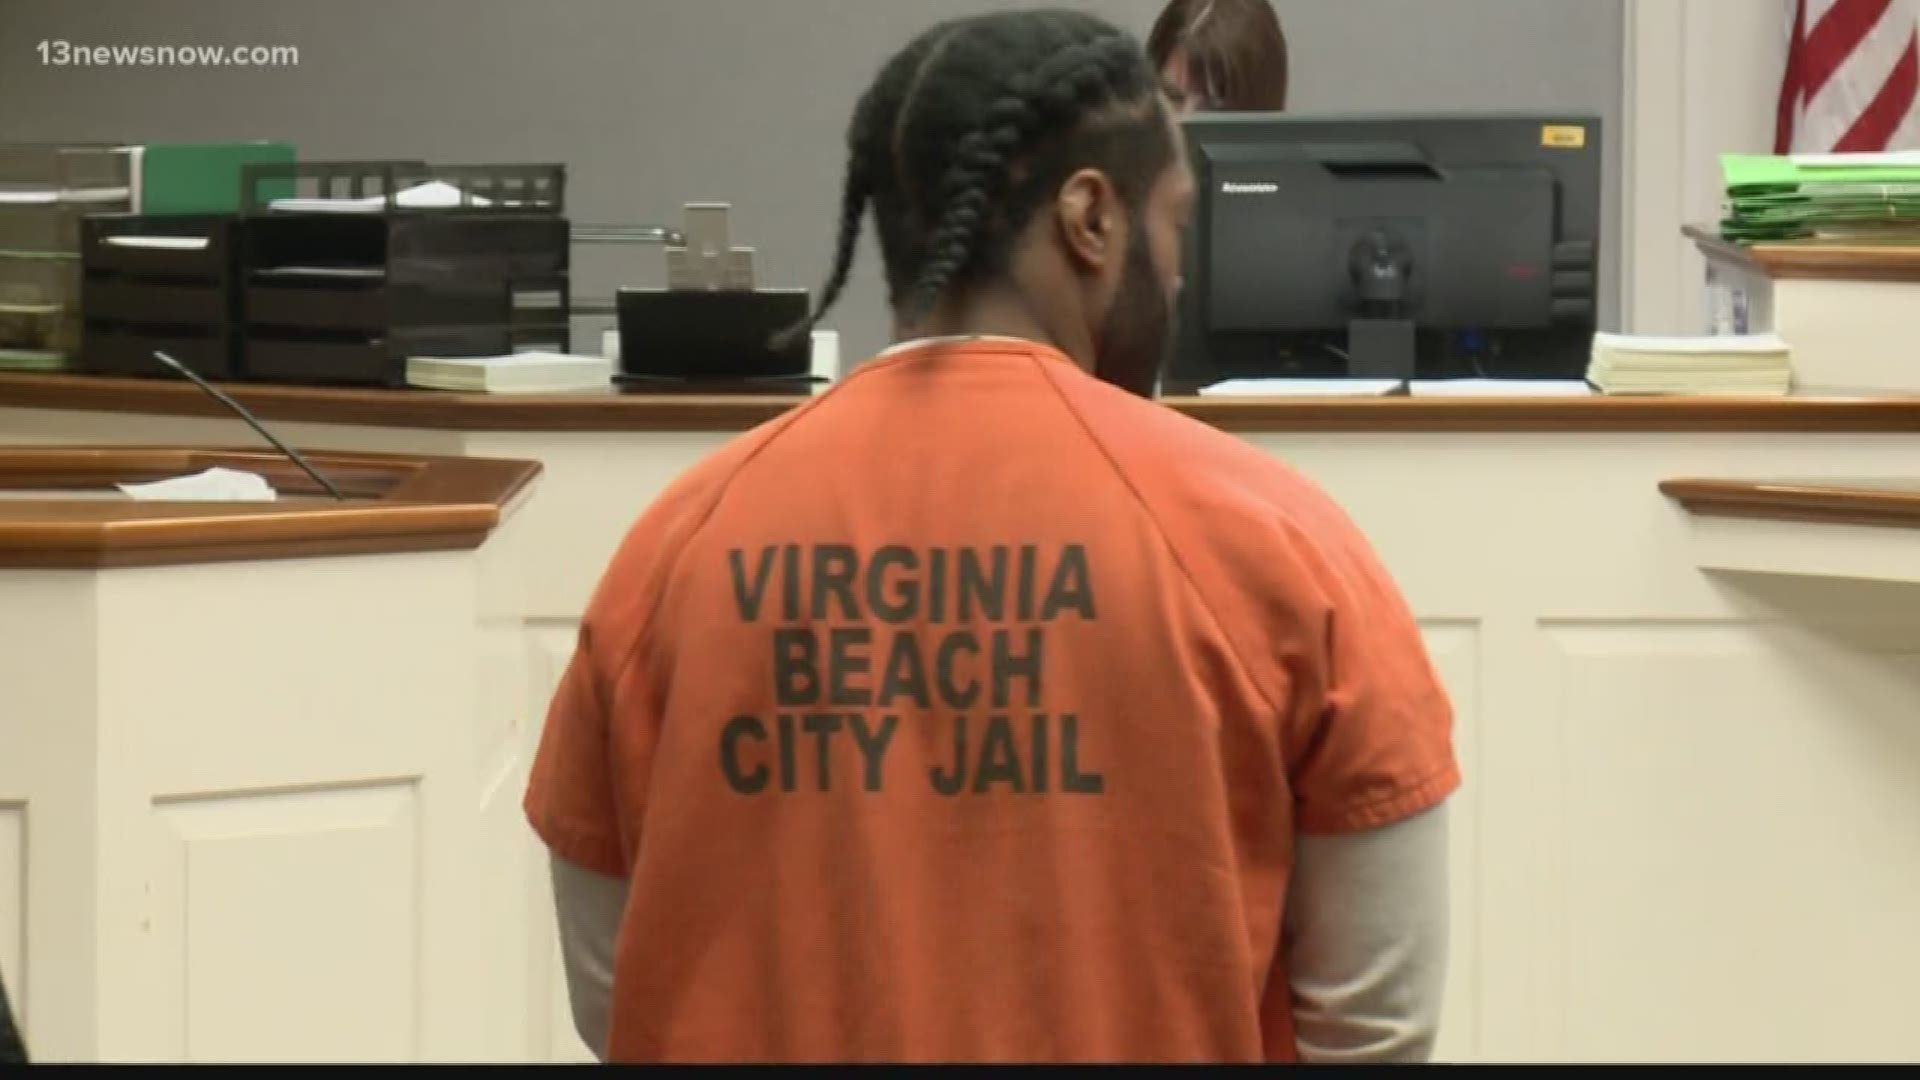 A man was sentenced to 35 years in prison Monday, after he was convicted of a Virginia Beach robbery that turned deadly back in 2010.